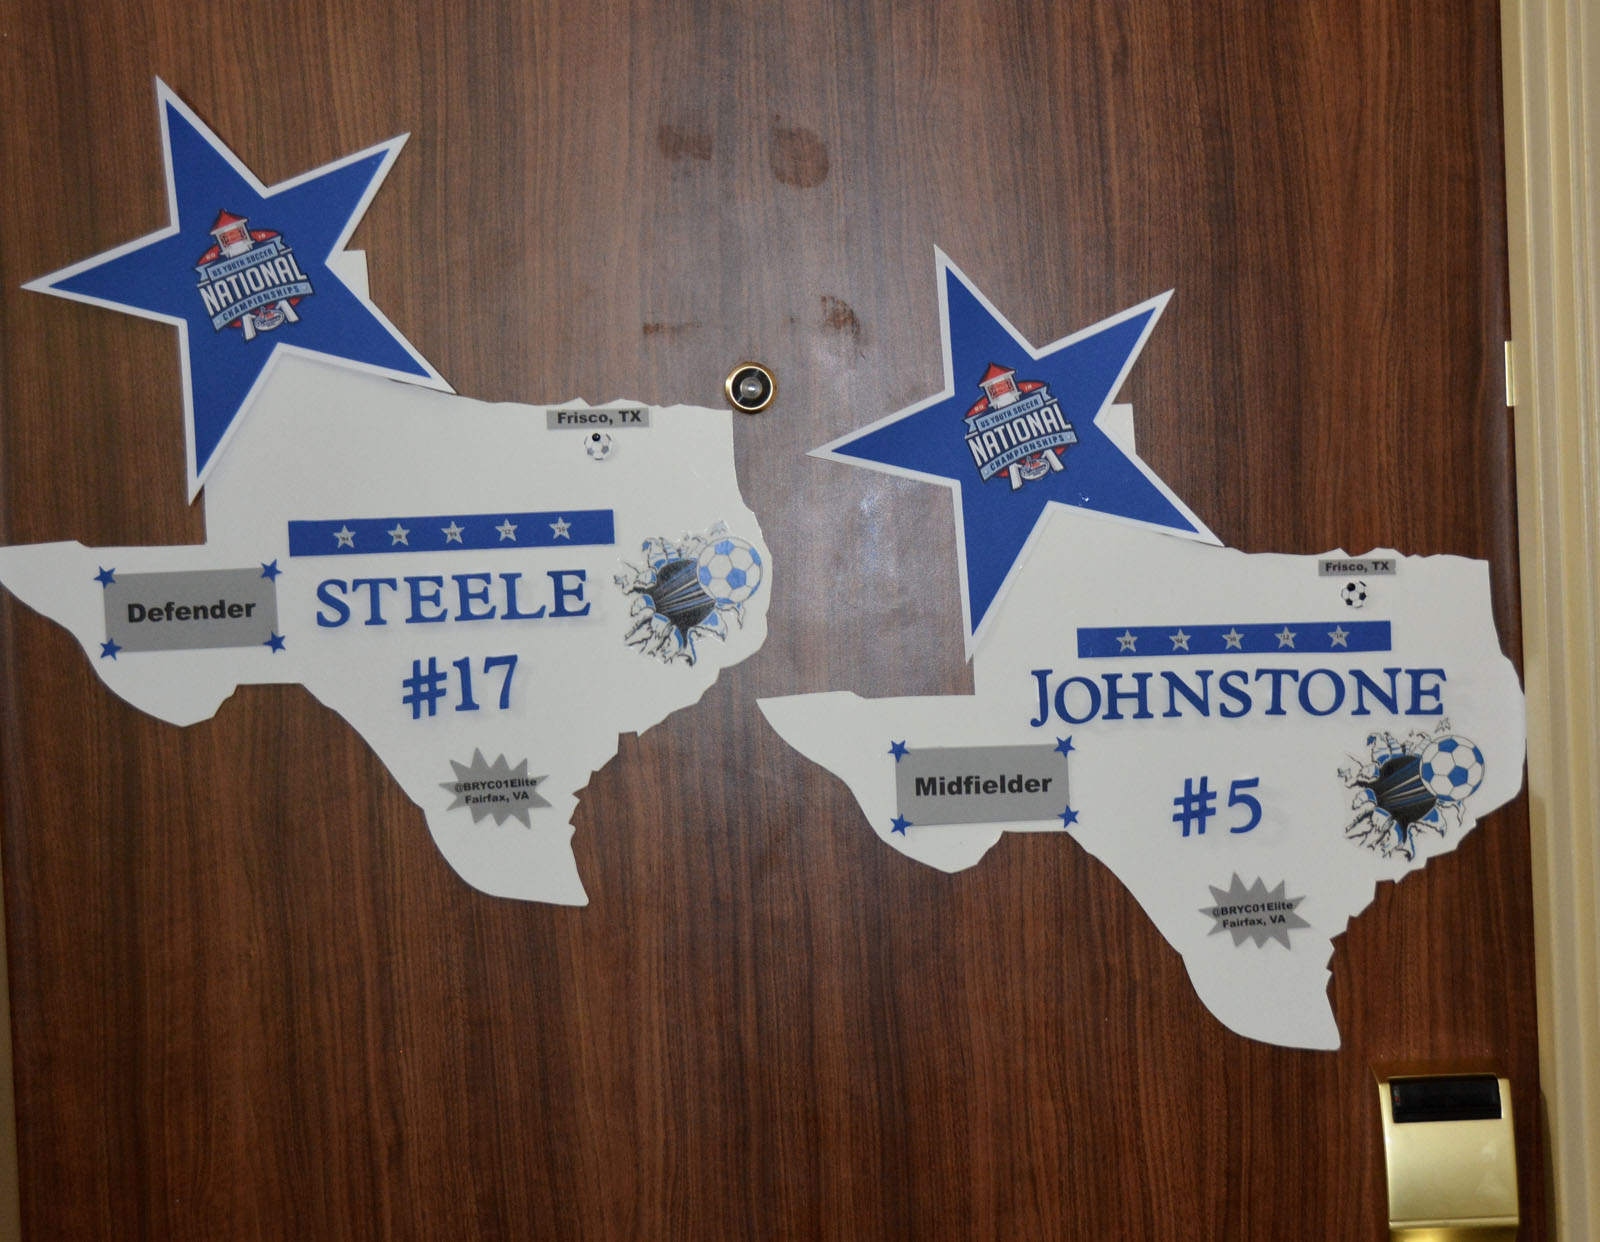 Denise Steele, parent of Jaden Steele, made door signs for each player to cheer them on.